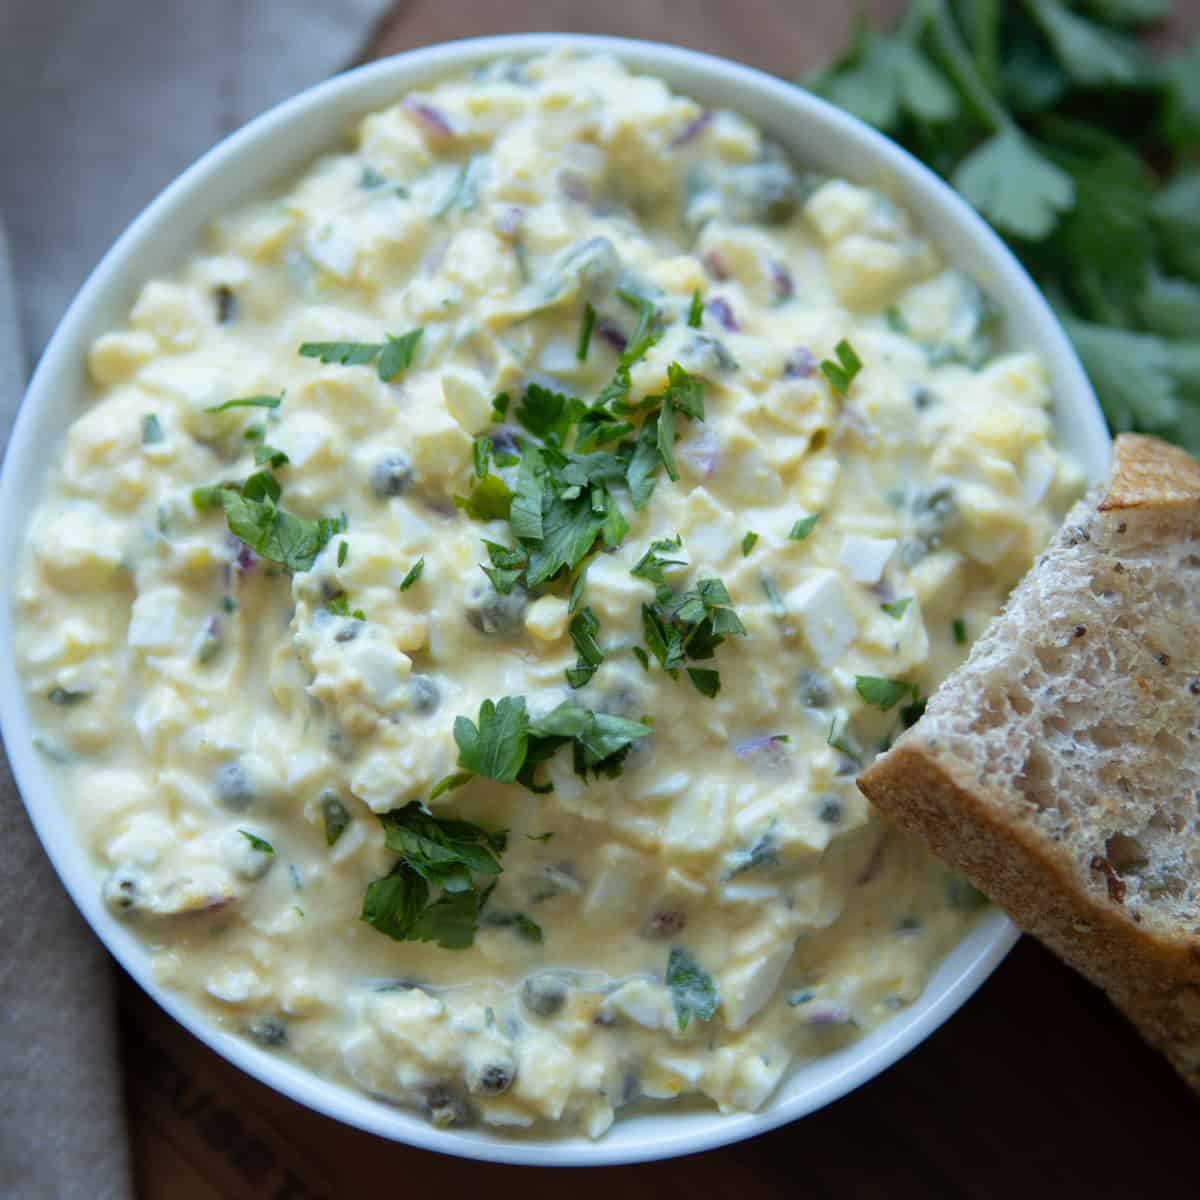 No mayo egg salad in a bowl topped with chopped herbs and bread.